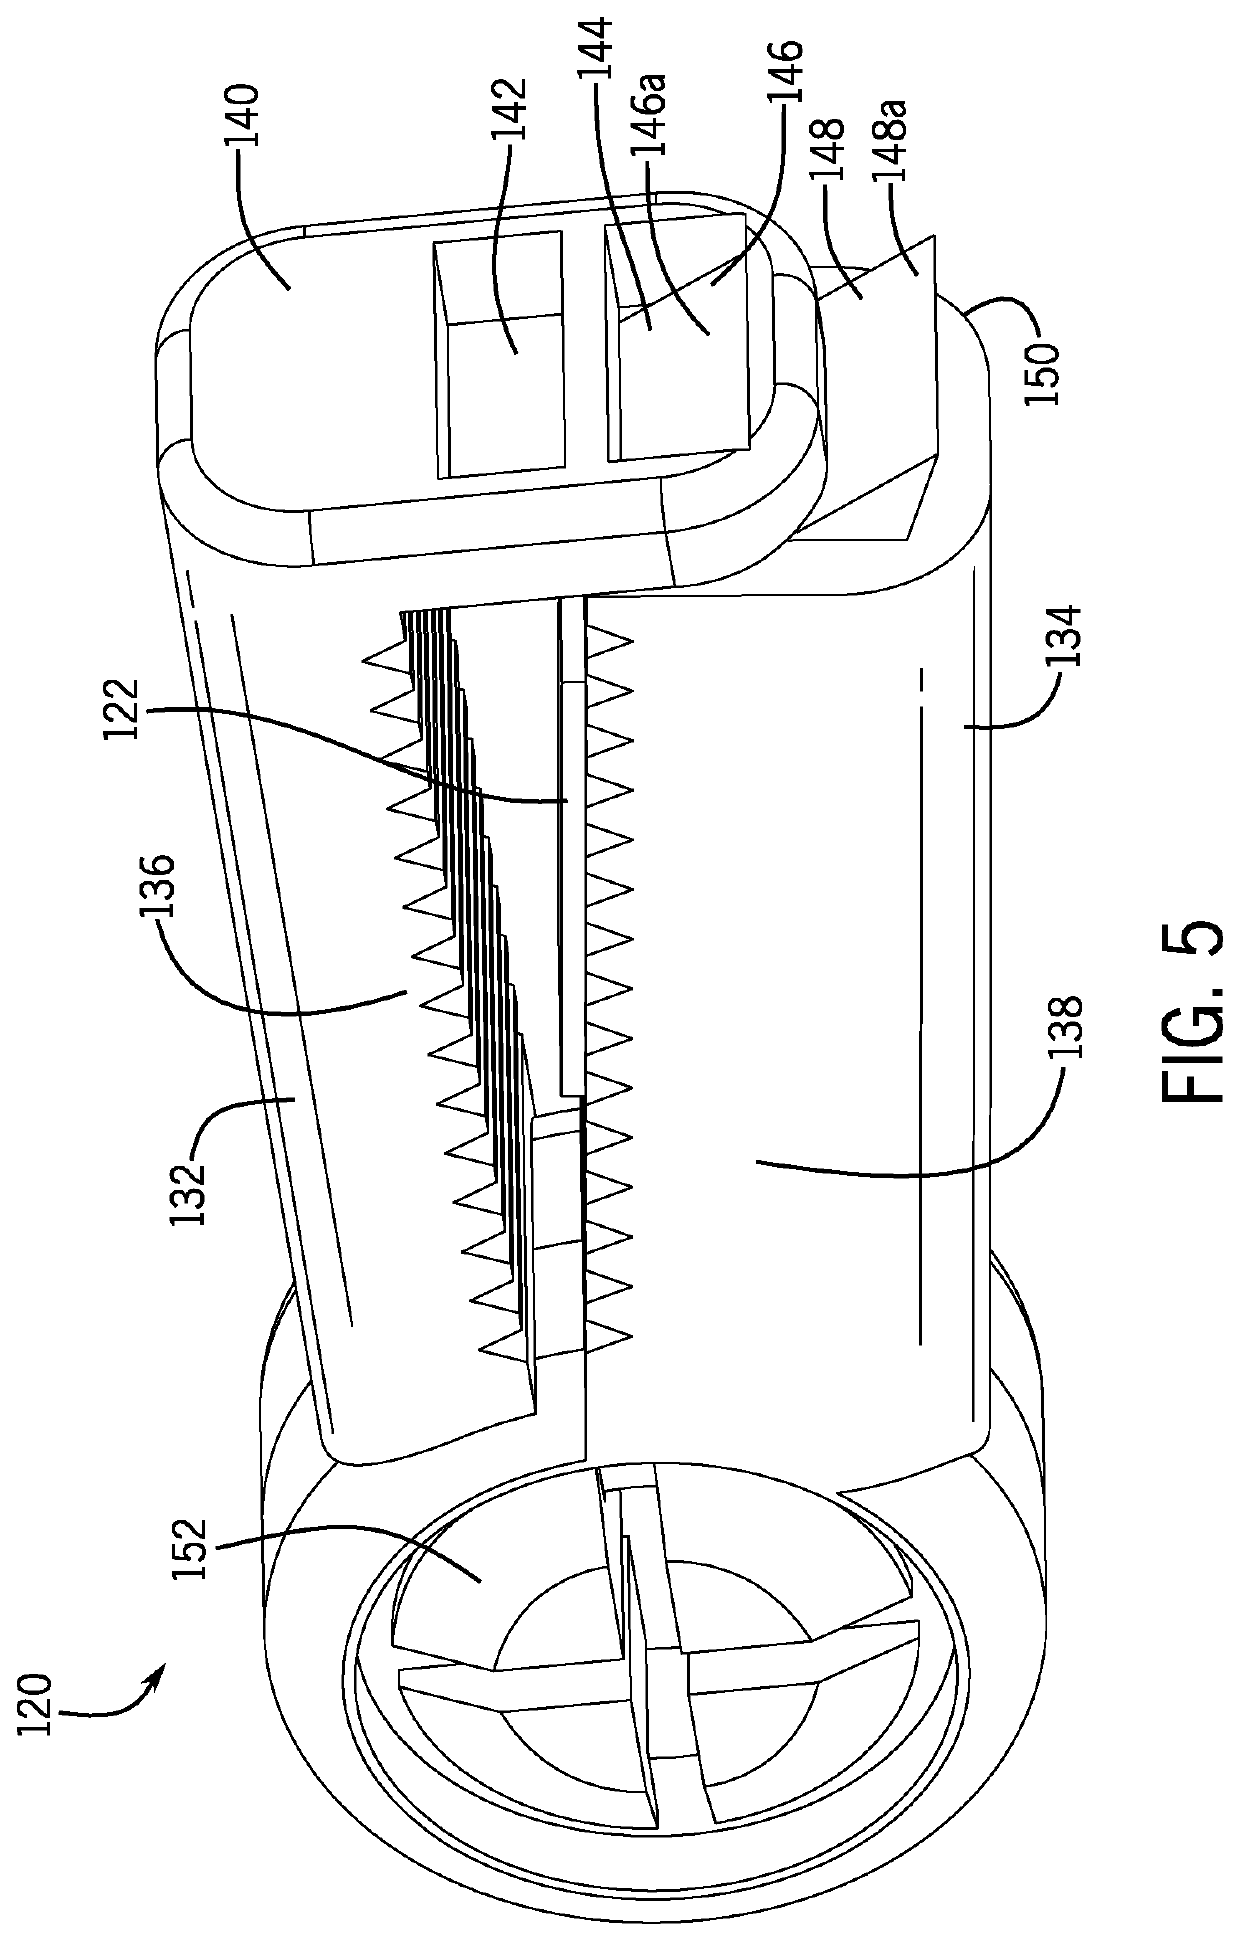 Physiological monitoring apparatuses, systems and methods